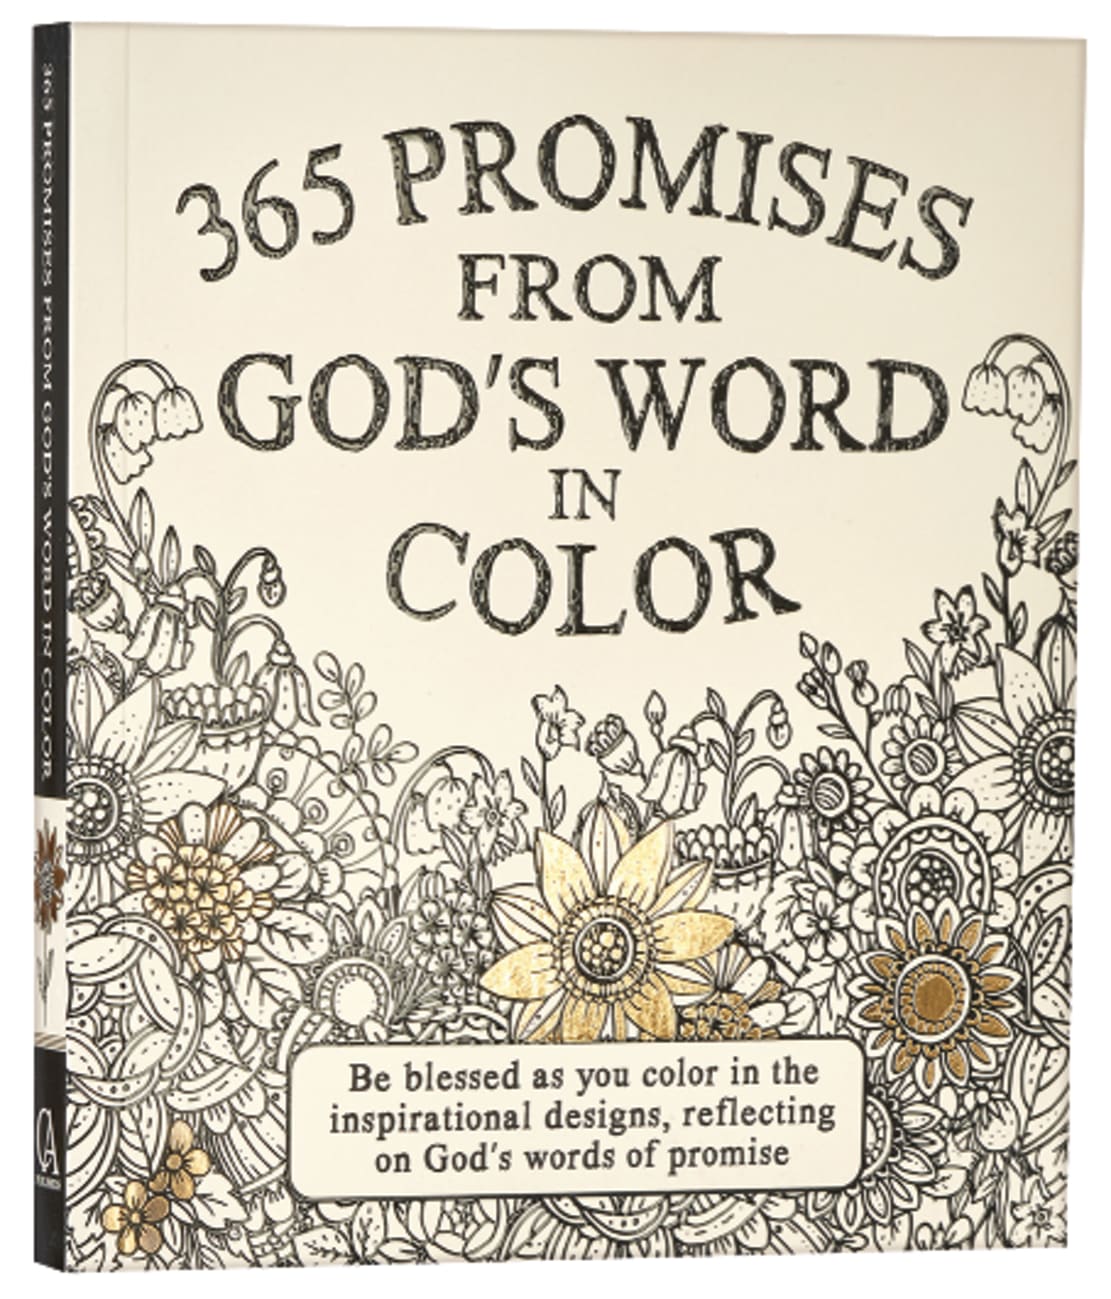 365 Promises From God's Word in Color (Adult Coloring Books Series) Paperback